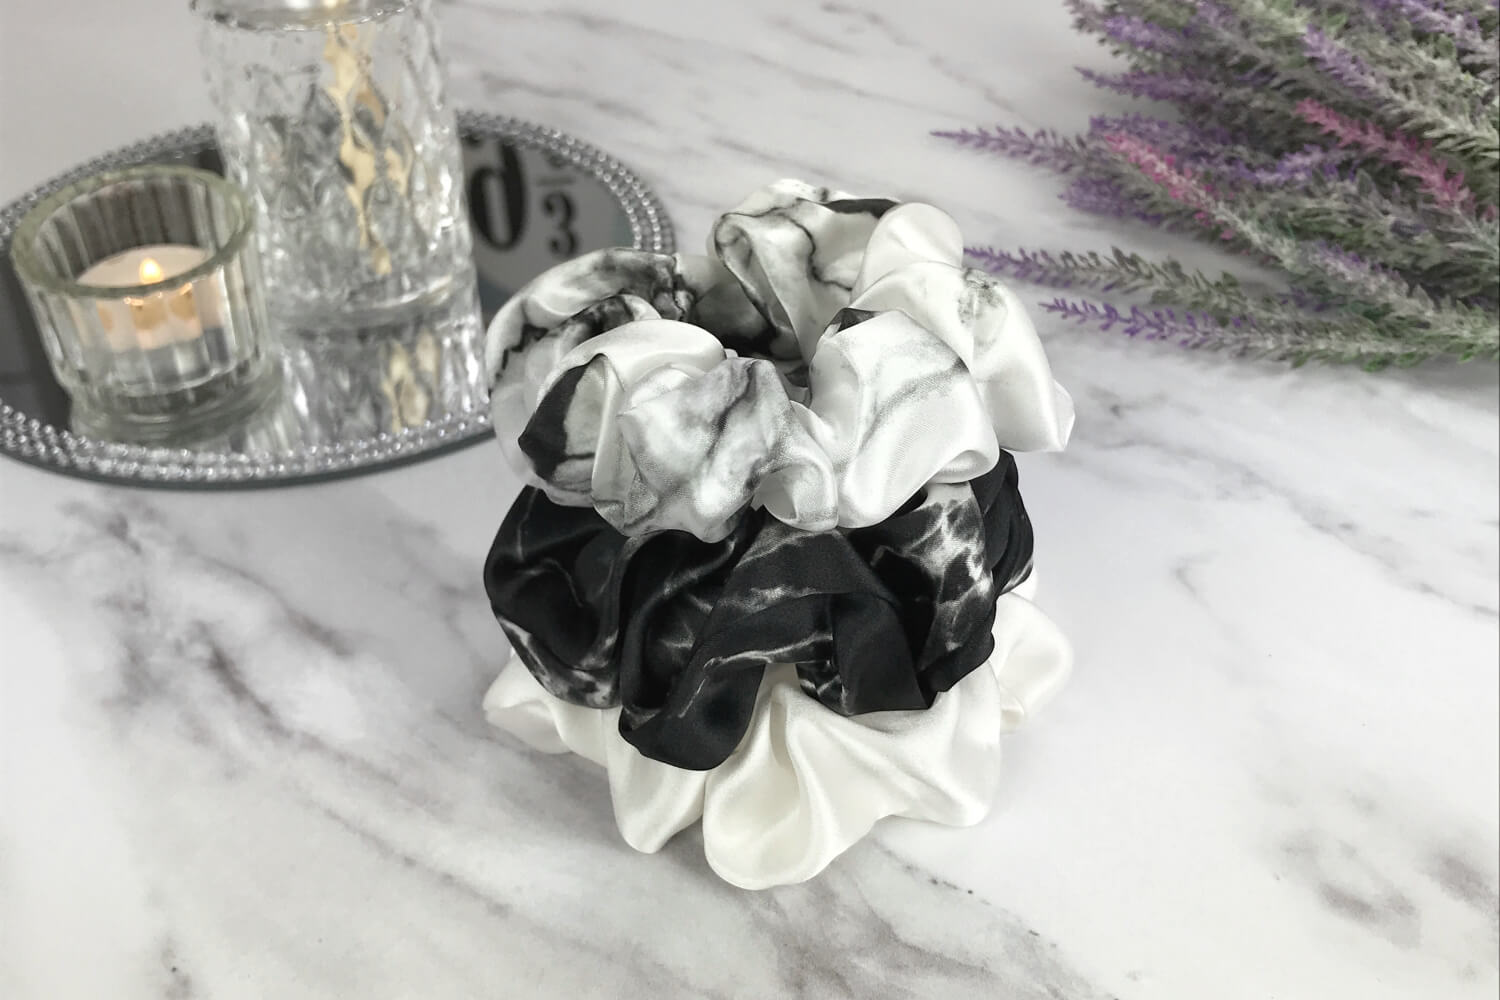 Celestial Silk large white marble, ivory and black marble silk scrunchies stacked on marble counter with lavender plant and a candle in the background